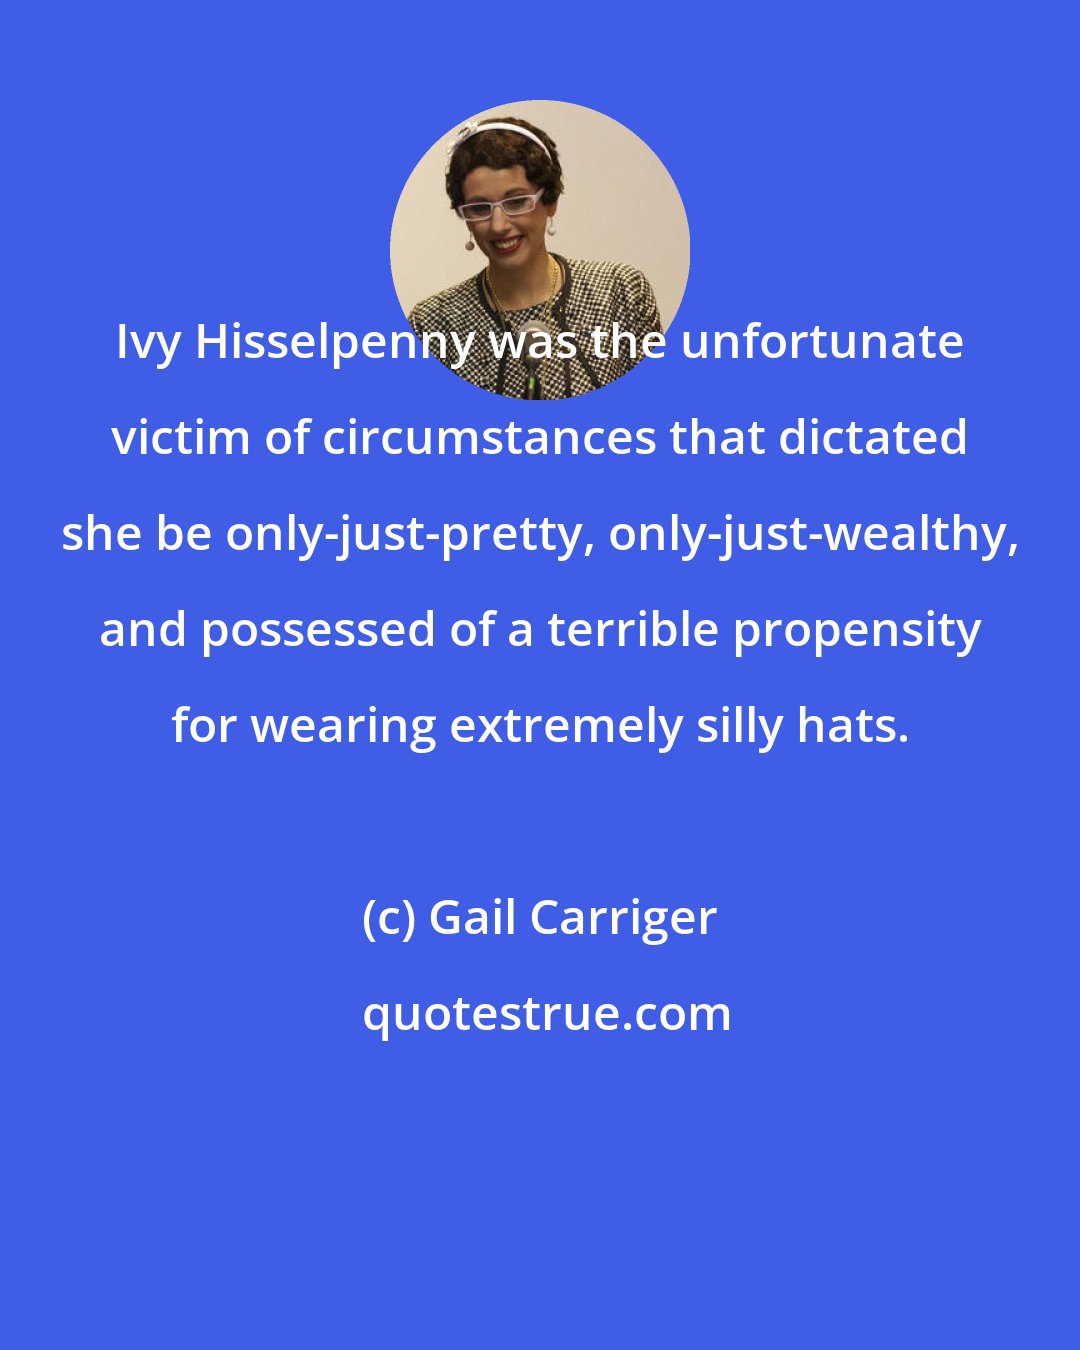 Gail Carriger: Ivy Hisselpenny was the unfortunate victim of circumstances that dictated she be only-just-pretty, only-just-wealthy, and possessed of a terrible propensity for wearing extremely silly hats.